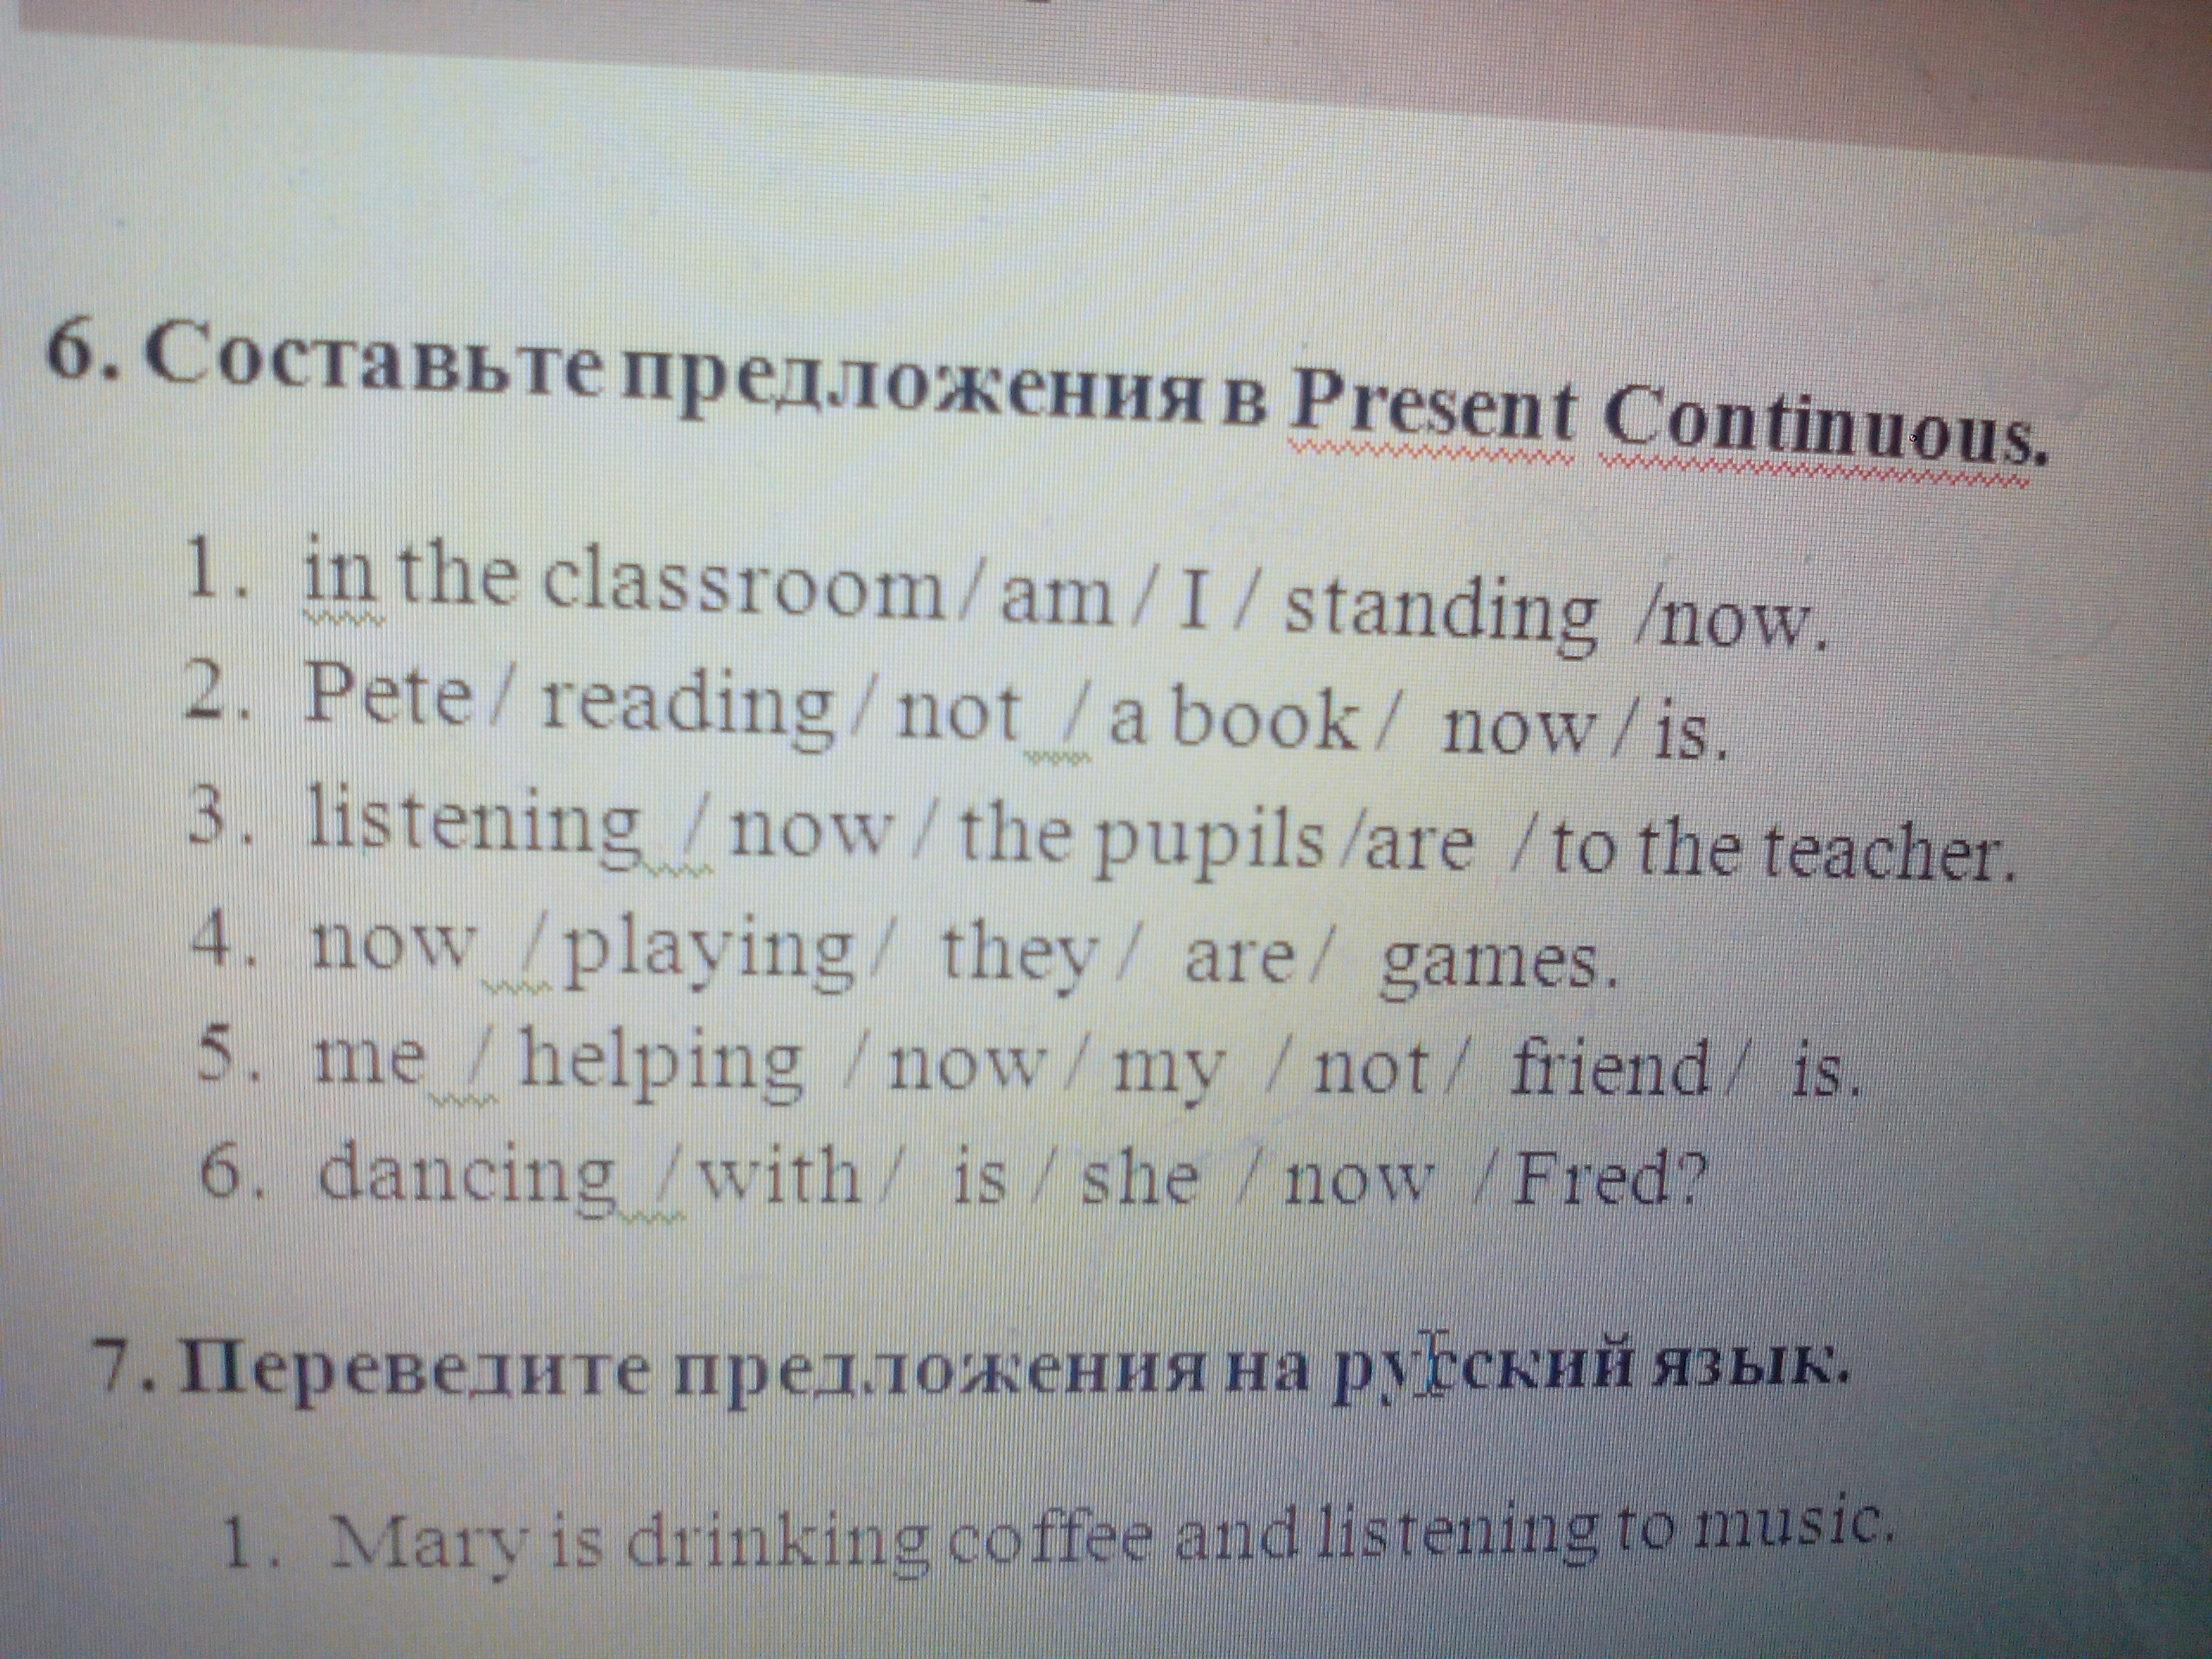 They is playing a game перевод. Три предложения на английском языке present Continuous. In the Classroom am i standing Now составить предложение. Составьте предложения в презент континиус Now, playing, they are games. Правило презент континиус.